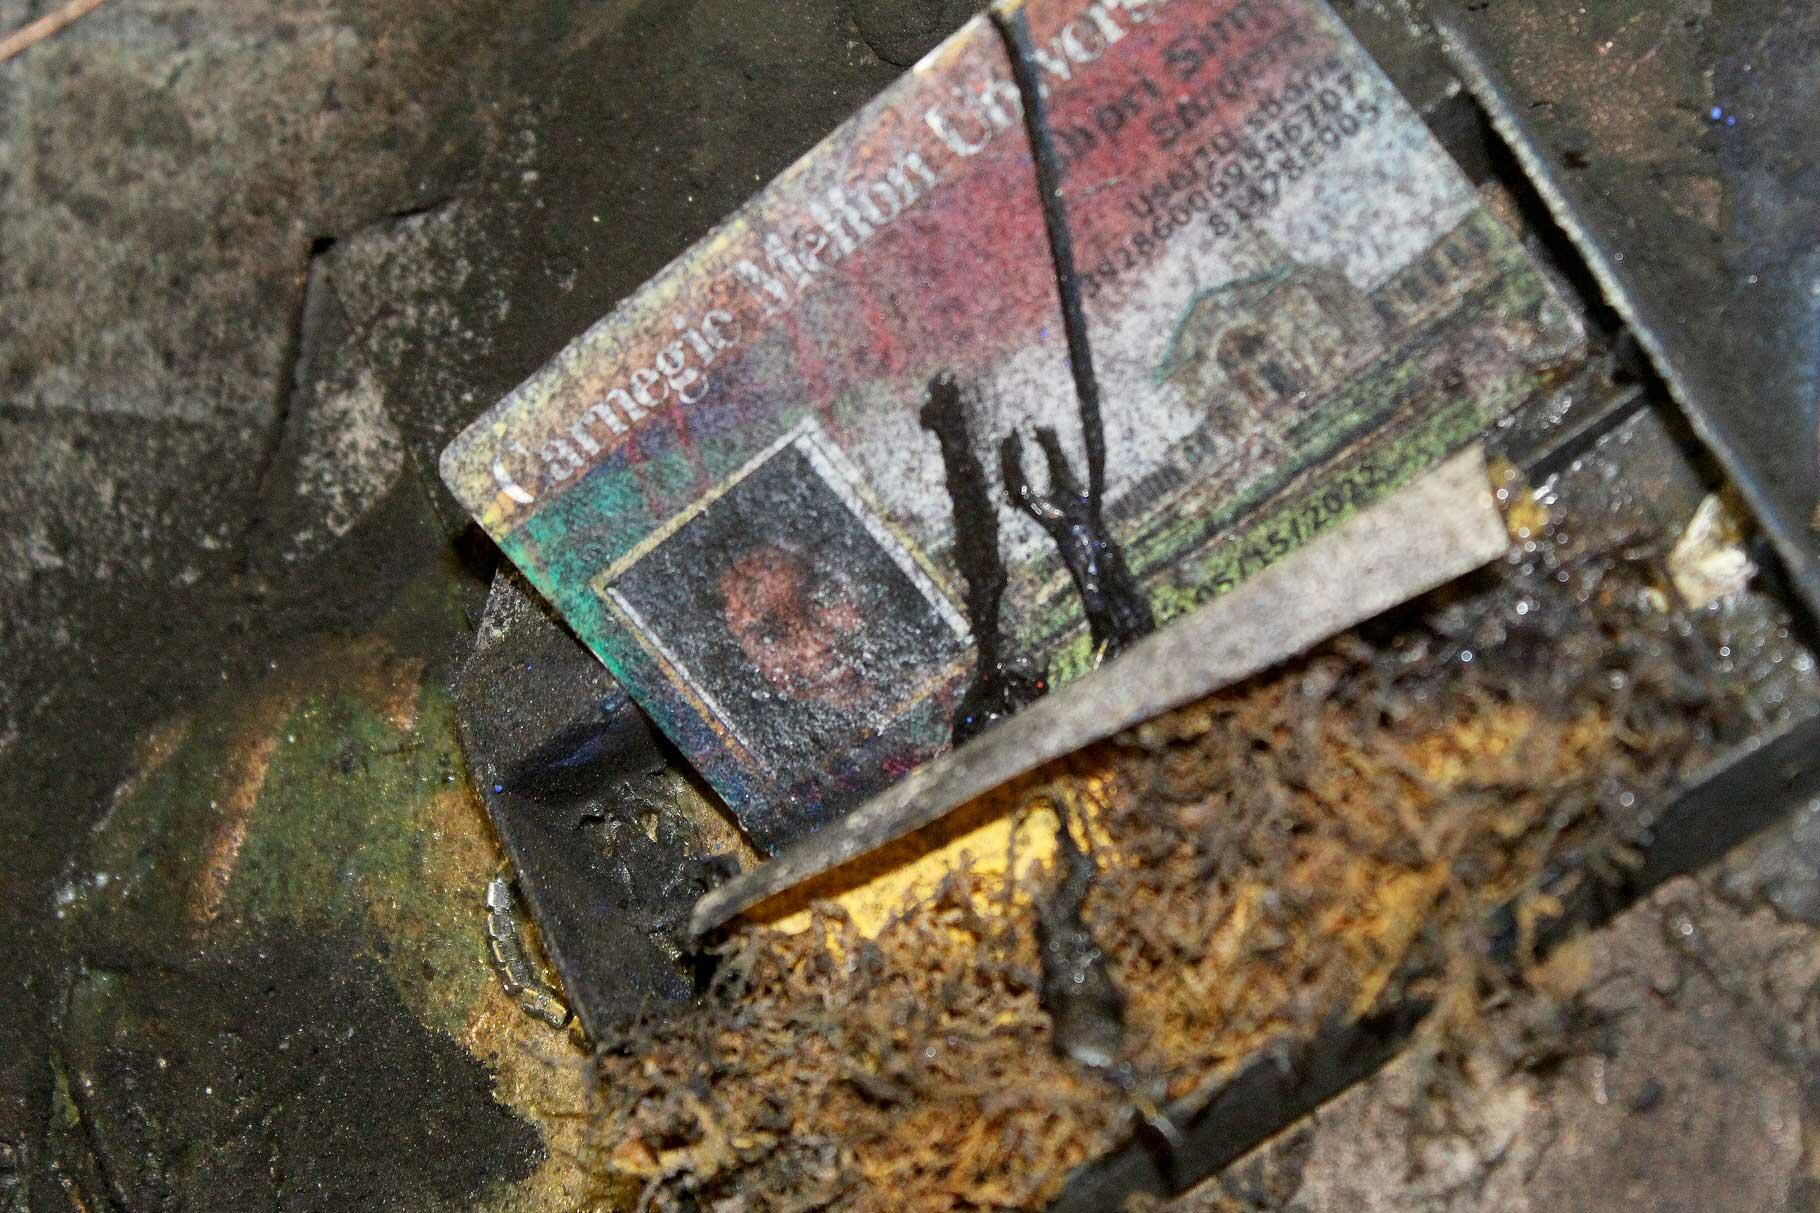 The image shows a close-up of STREETTRASH, featuring the artist's undergraduate student ID covered in thick black liquid and flecks of aerosol paint.